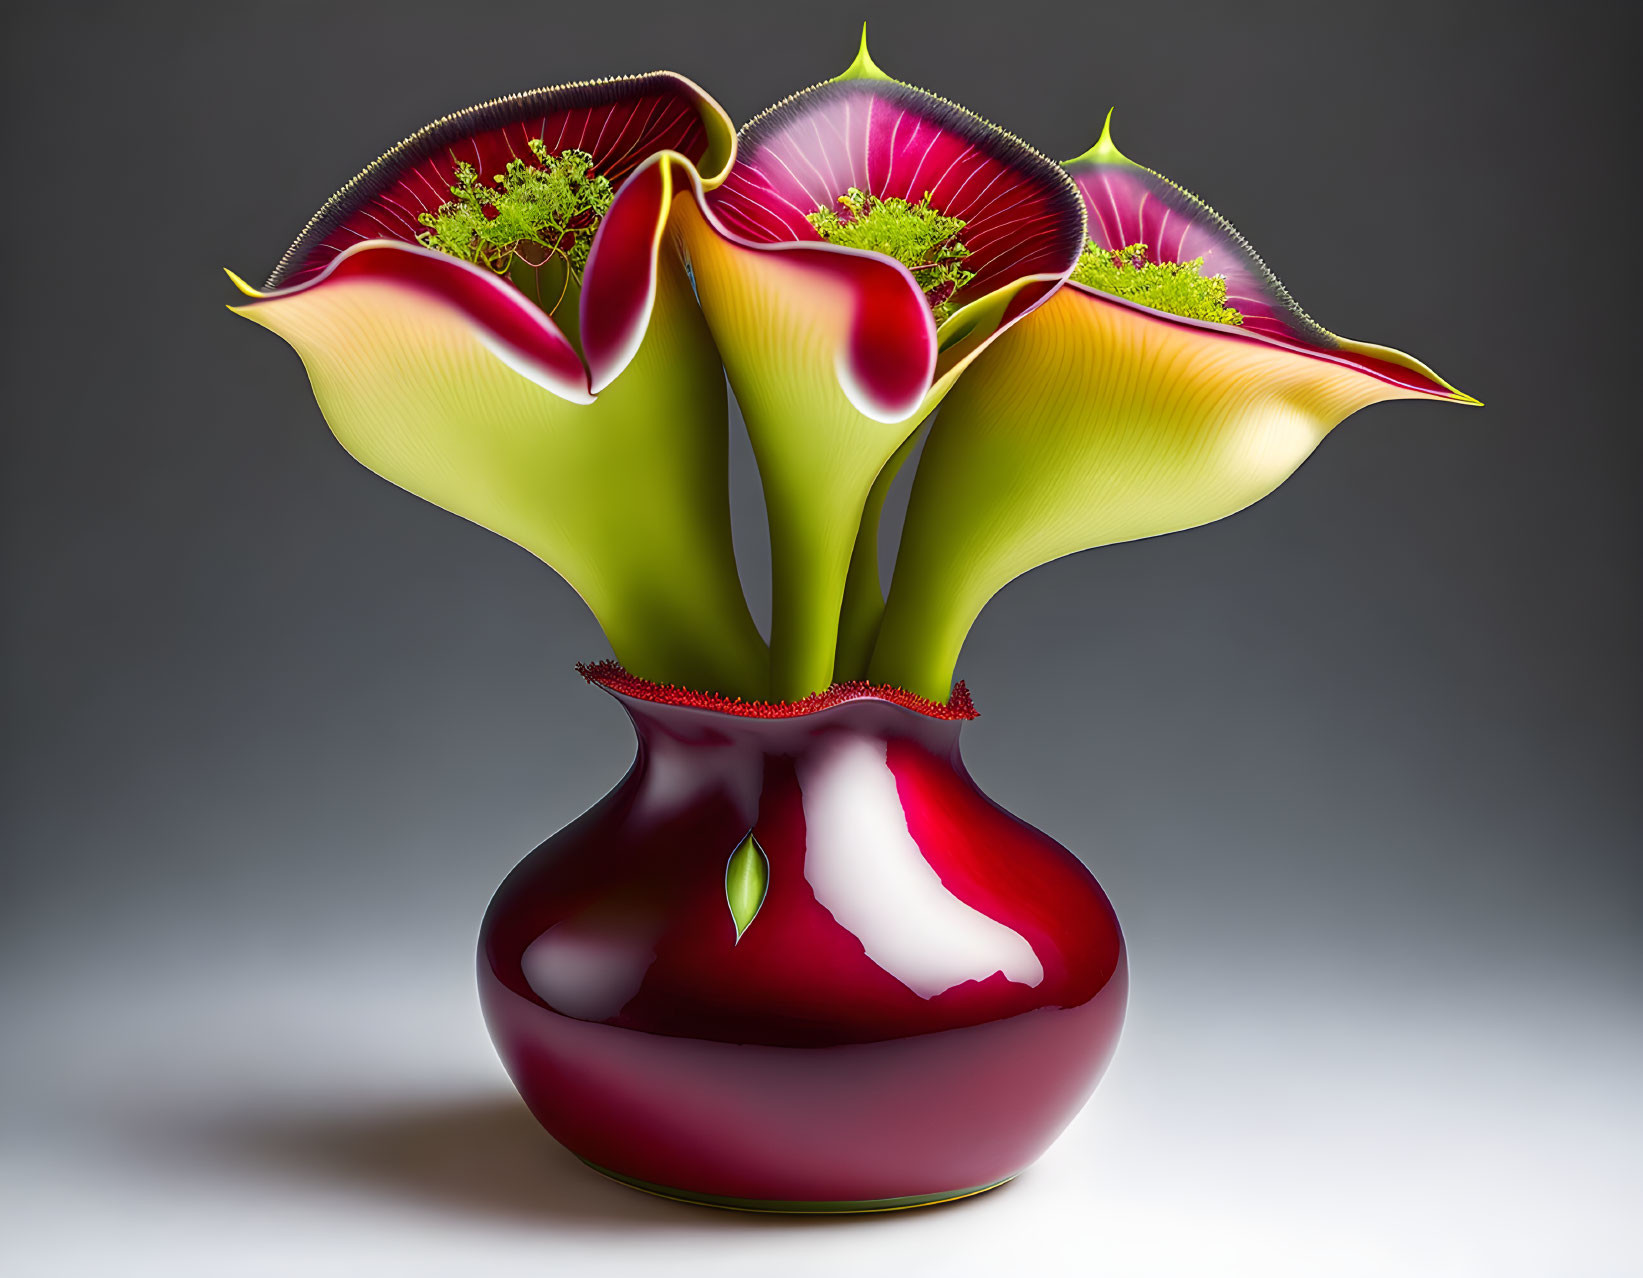 Vibrant red vase with stylized calla lilies on gradient background